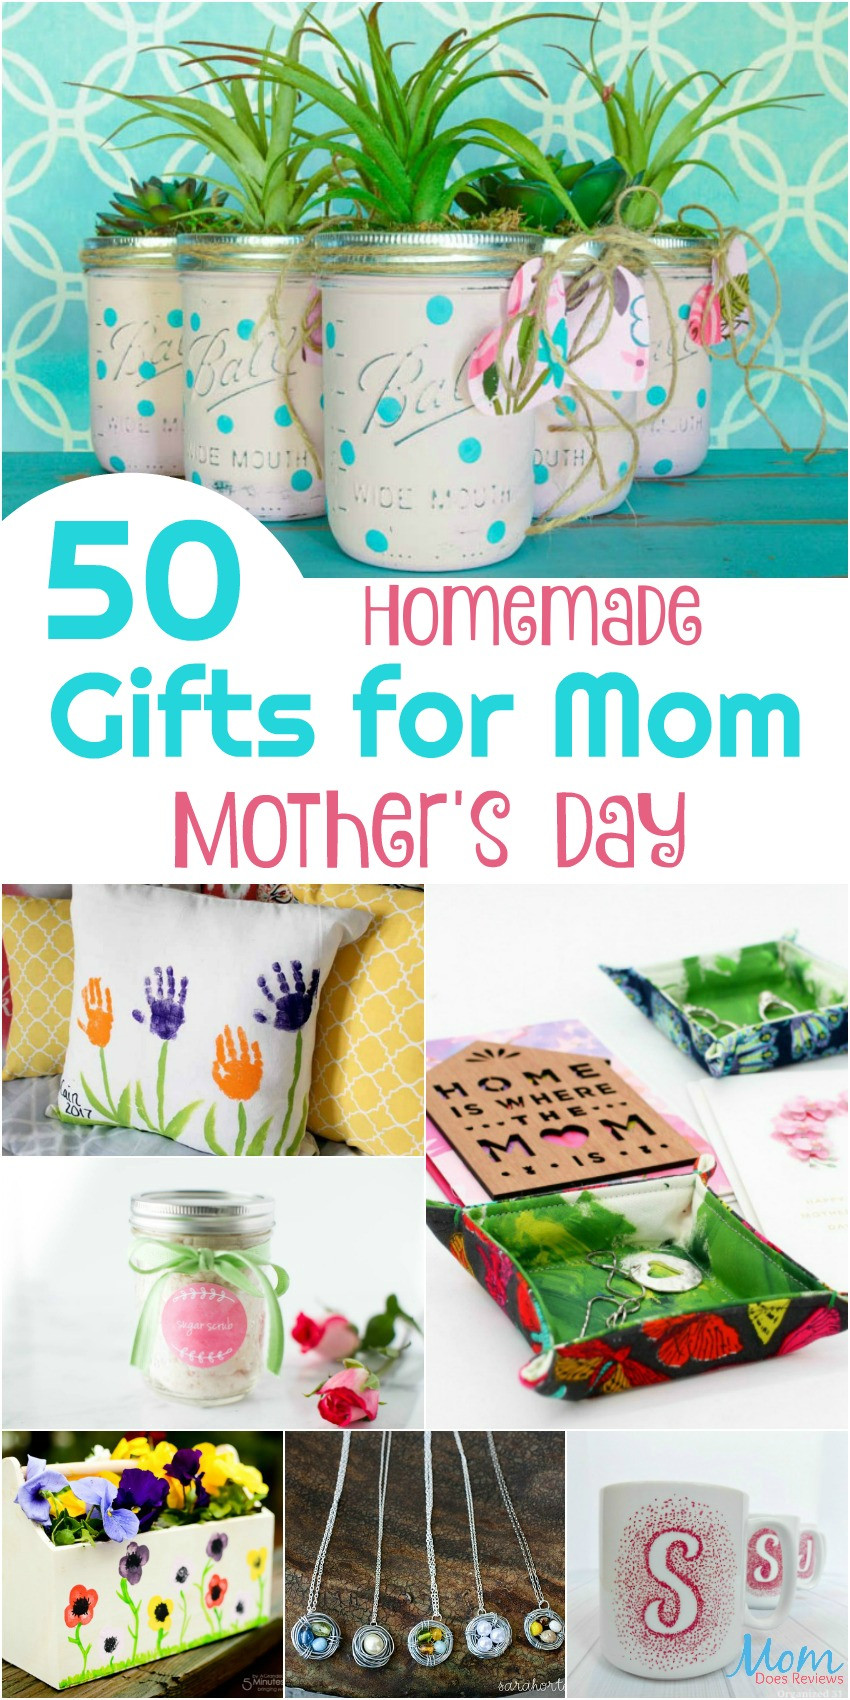 Mothers Day 2018 Gifts
 50 Homemade Gifts for Mom on Mother s Day Mom Does Reviews